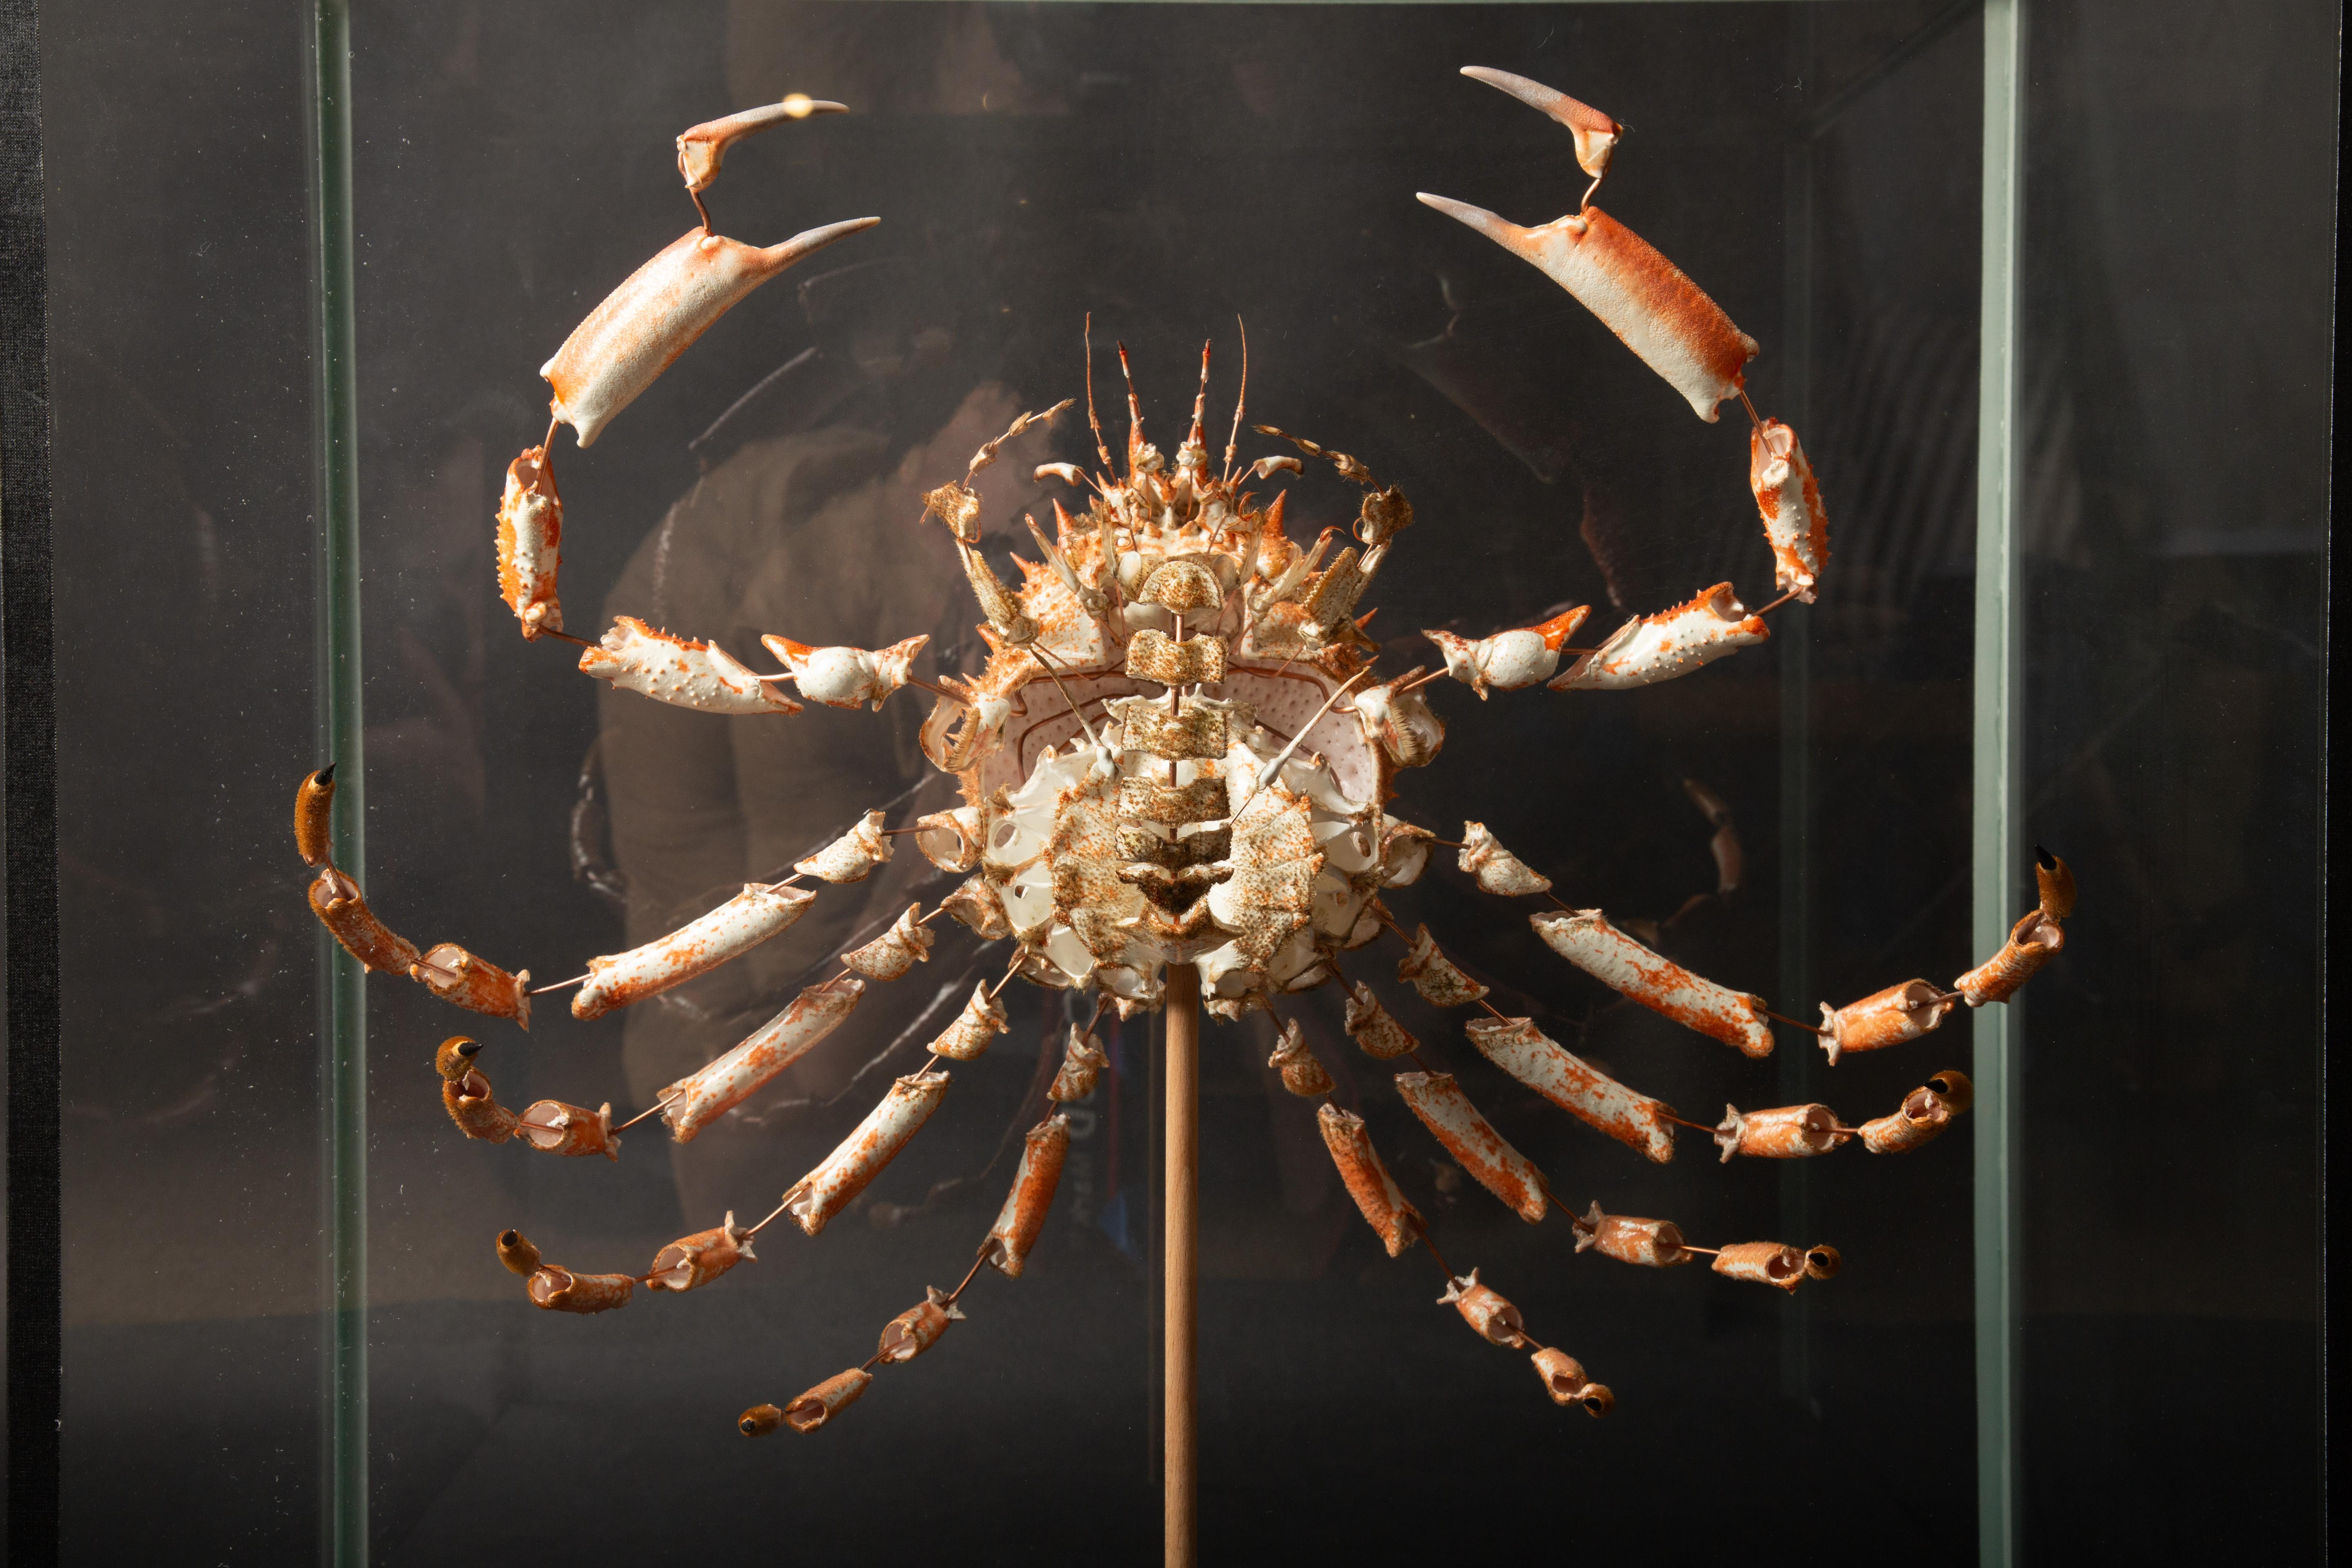 Deconstructed Spiny Spider Crab (Maja Brachydactyla) Specimen Under Custom Glass Case.

Maja brachydactyla belongs to the Majidae family and is a type of crab. Initially considered a subspecies of M. squinado, it was later identified as a distinct